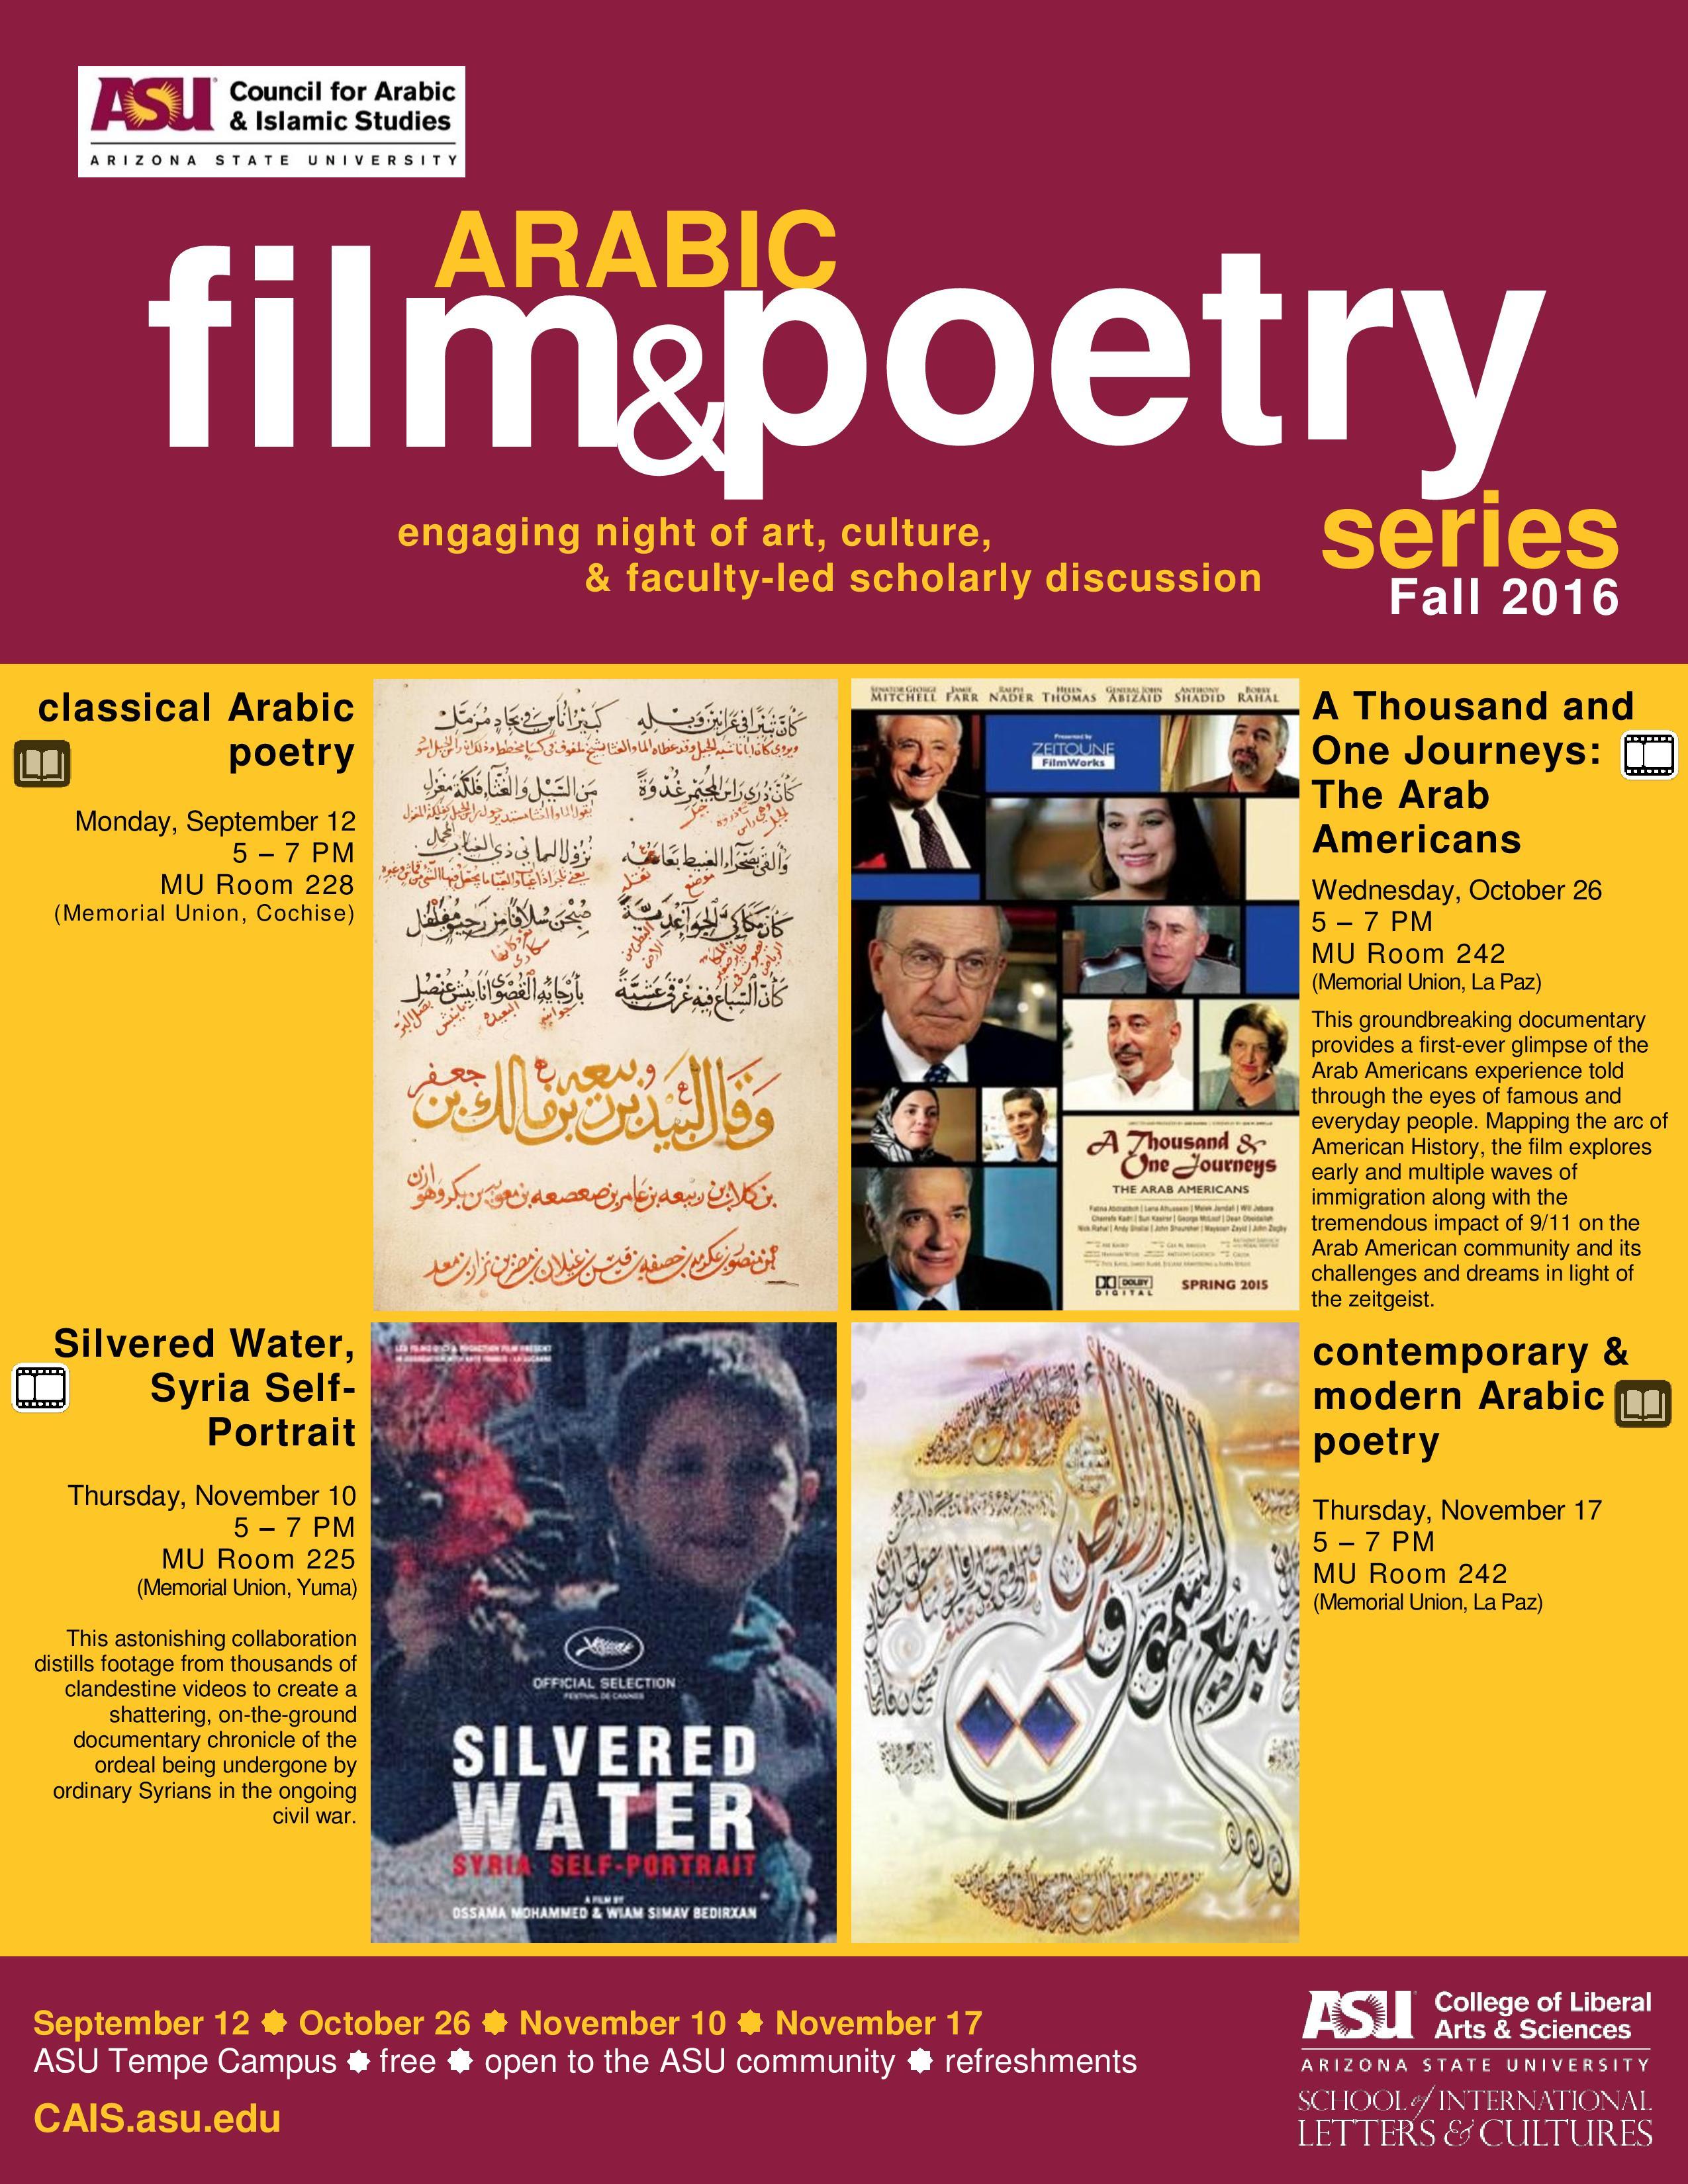 Arabic film and poetry series fall 2016 flyer